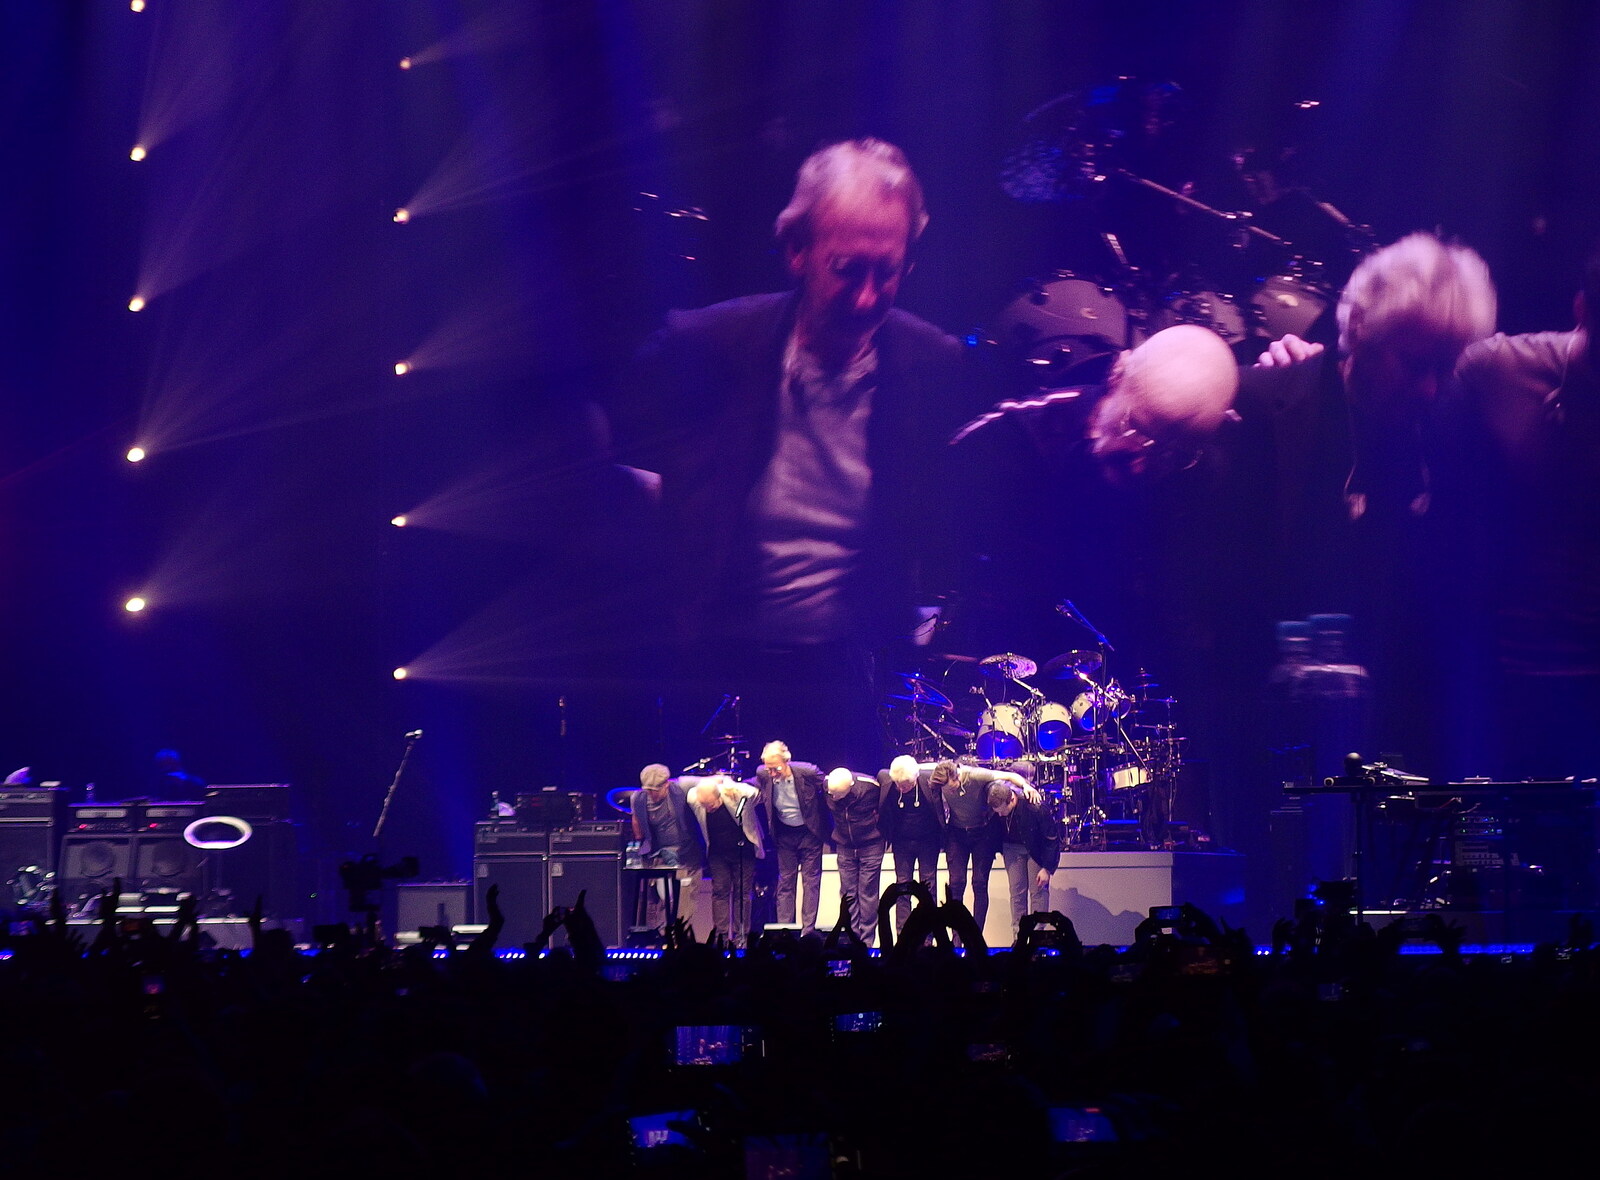 Genesis take a bow at the end of an epic gig from Genesis at the O2, North Greenwich, London - 24th March 2022